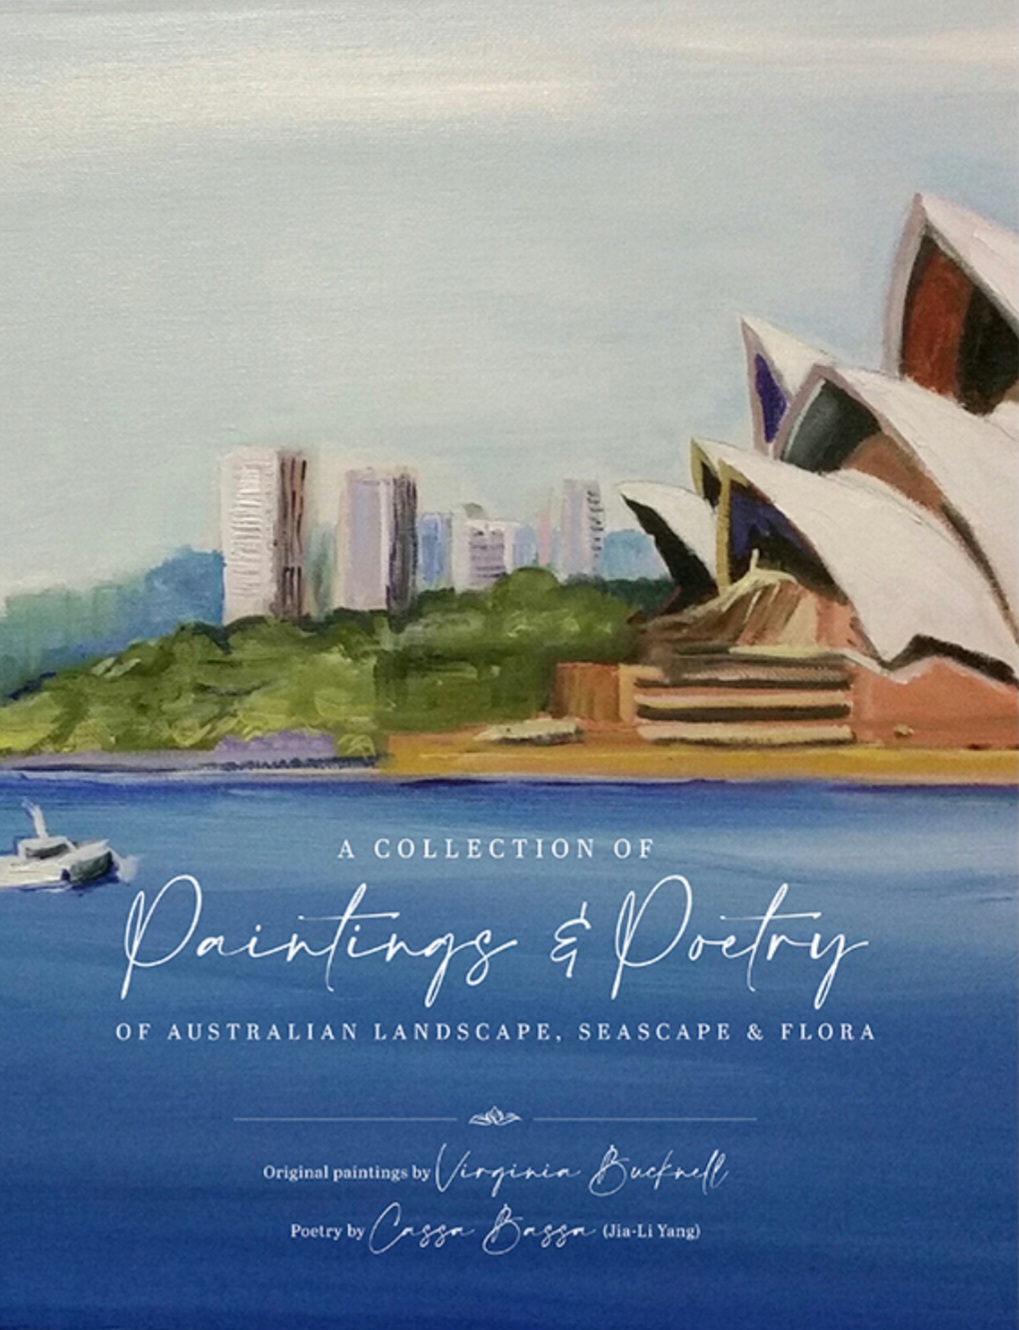 Publication – A Collection of Paintings and Poetry